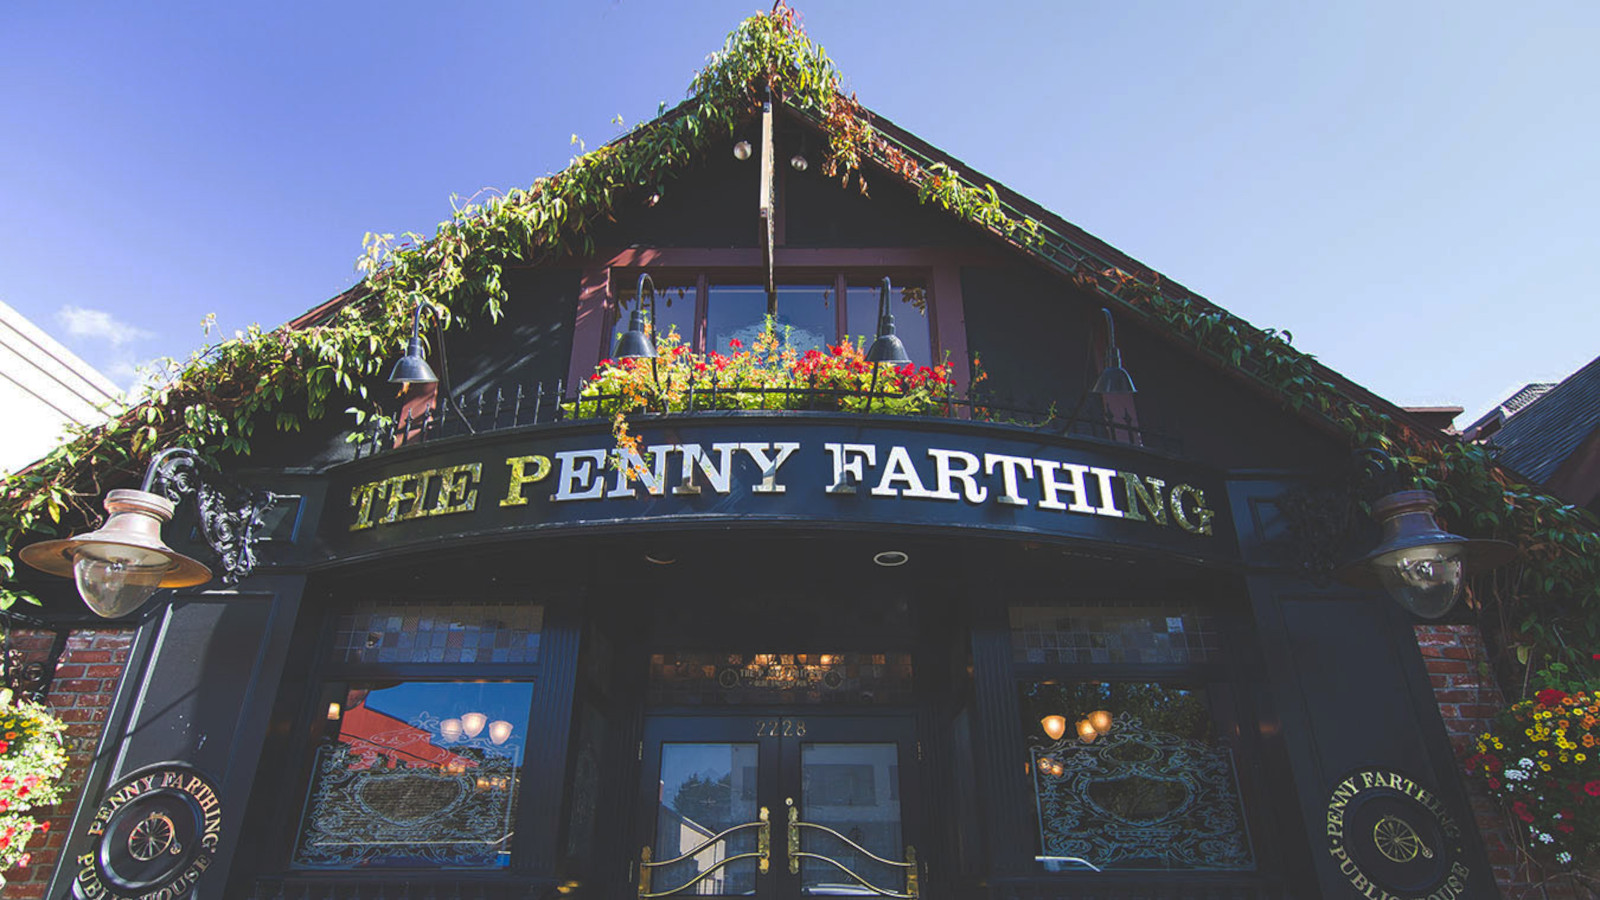 The Penny Farthing entrance